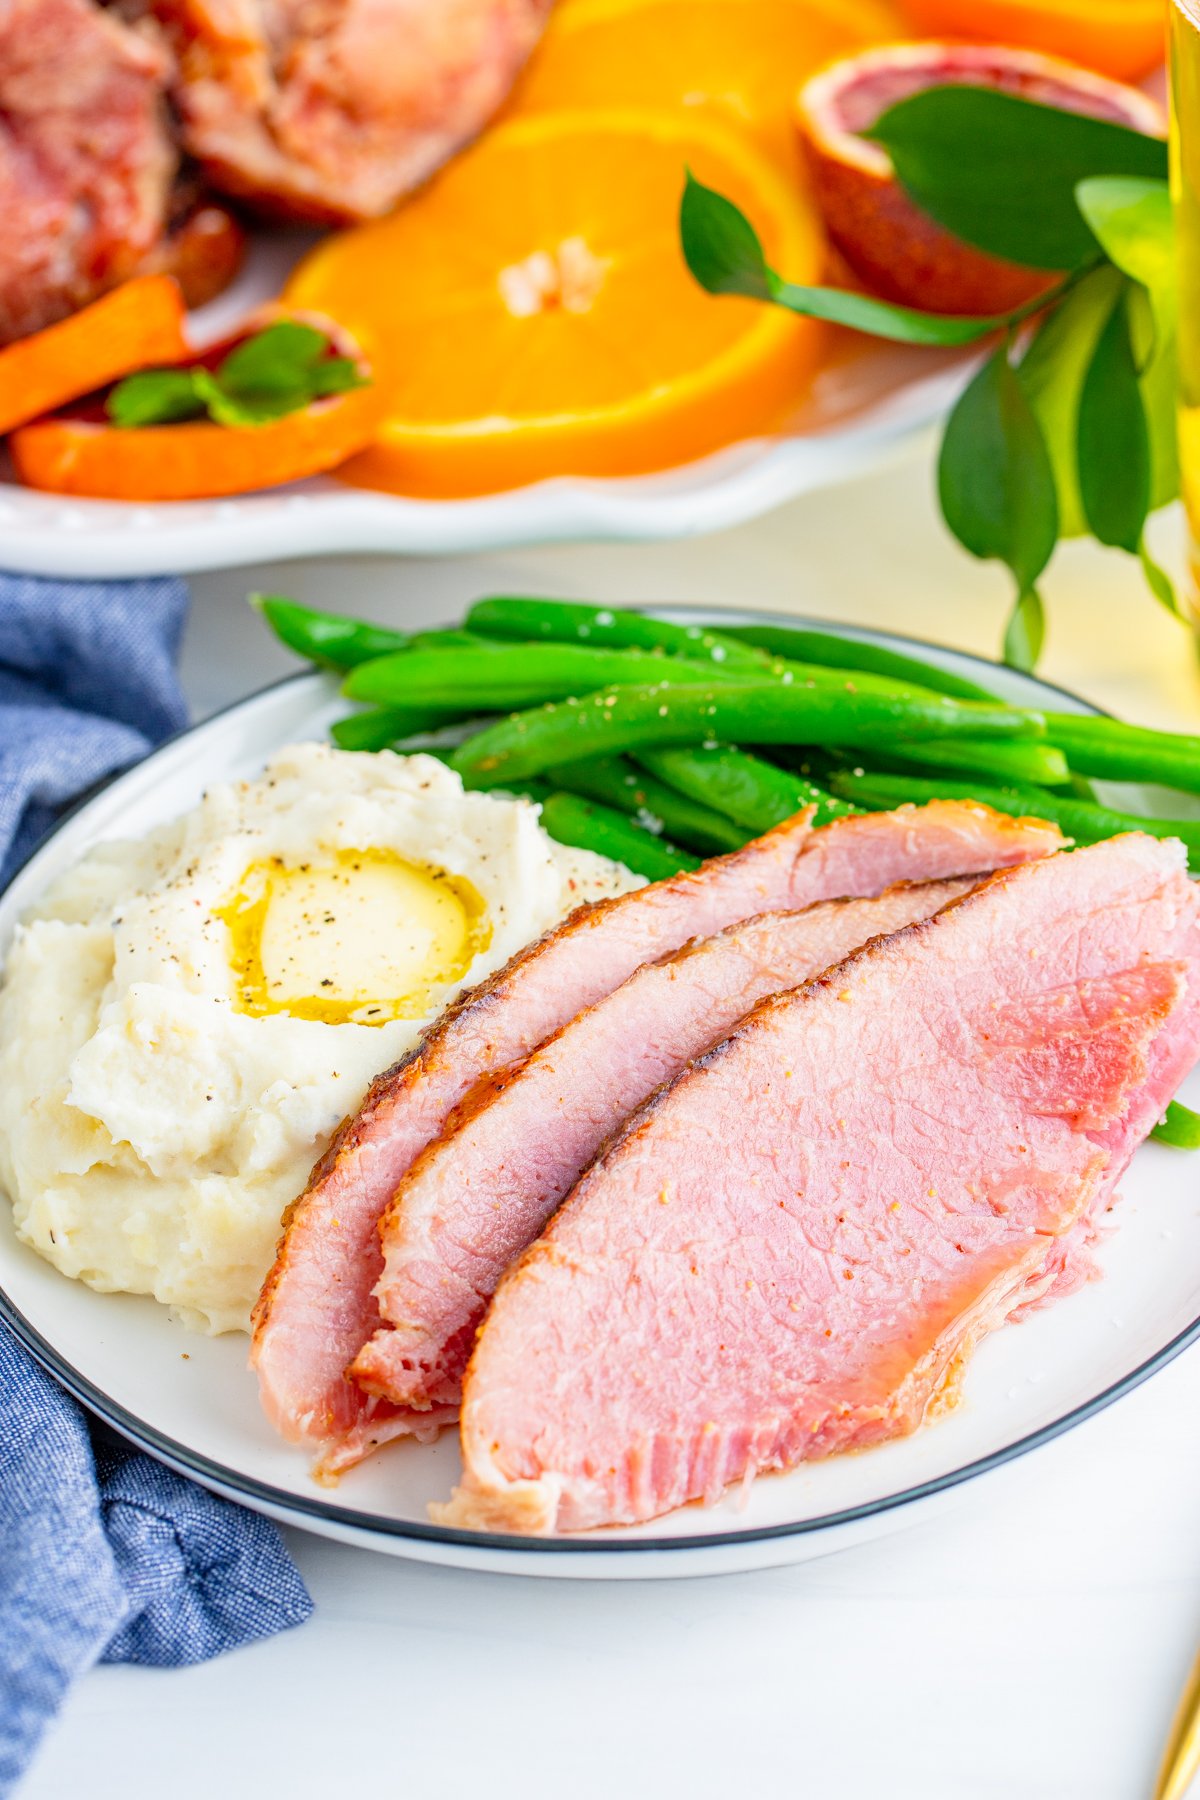 Sliced Honey Baked Ham on plate with mashed potatoes and green beans